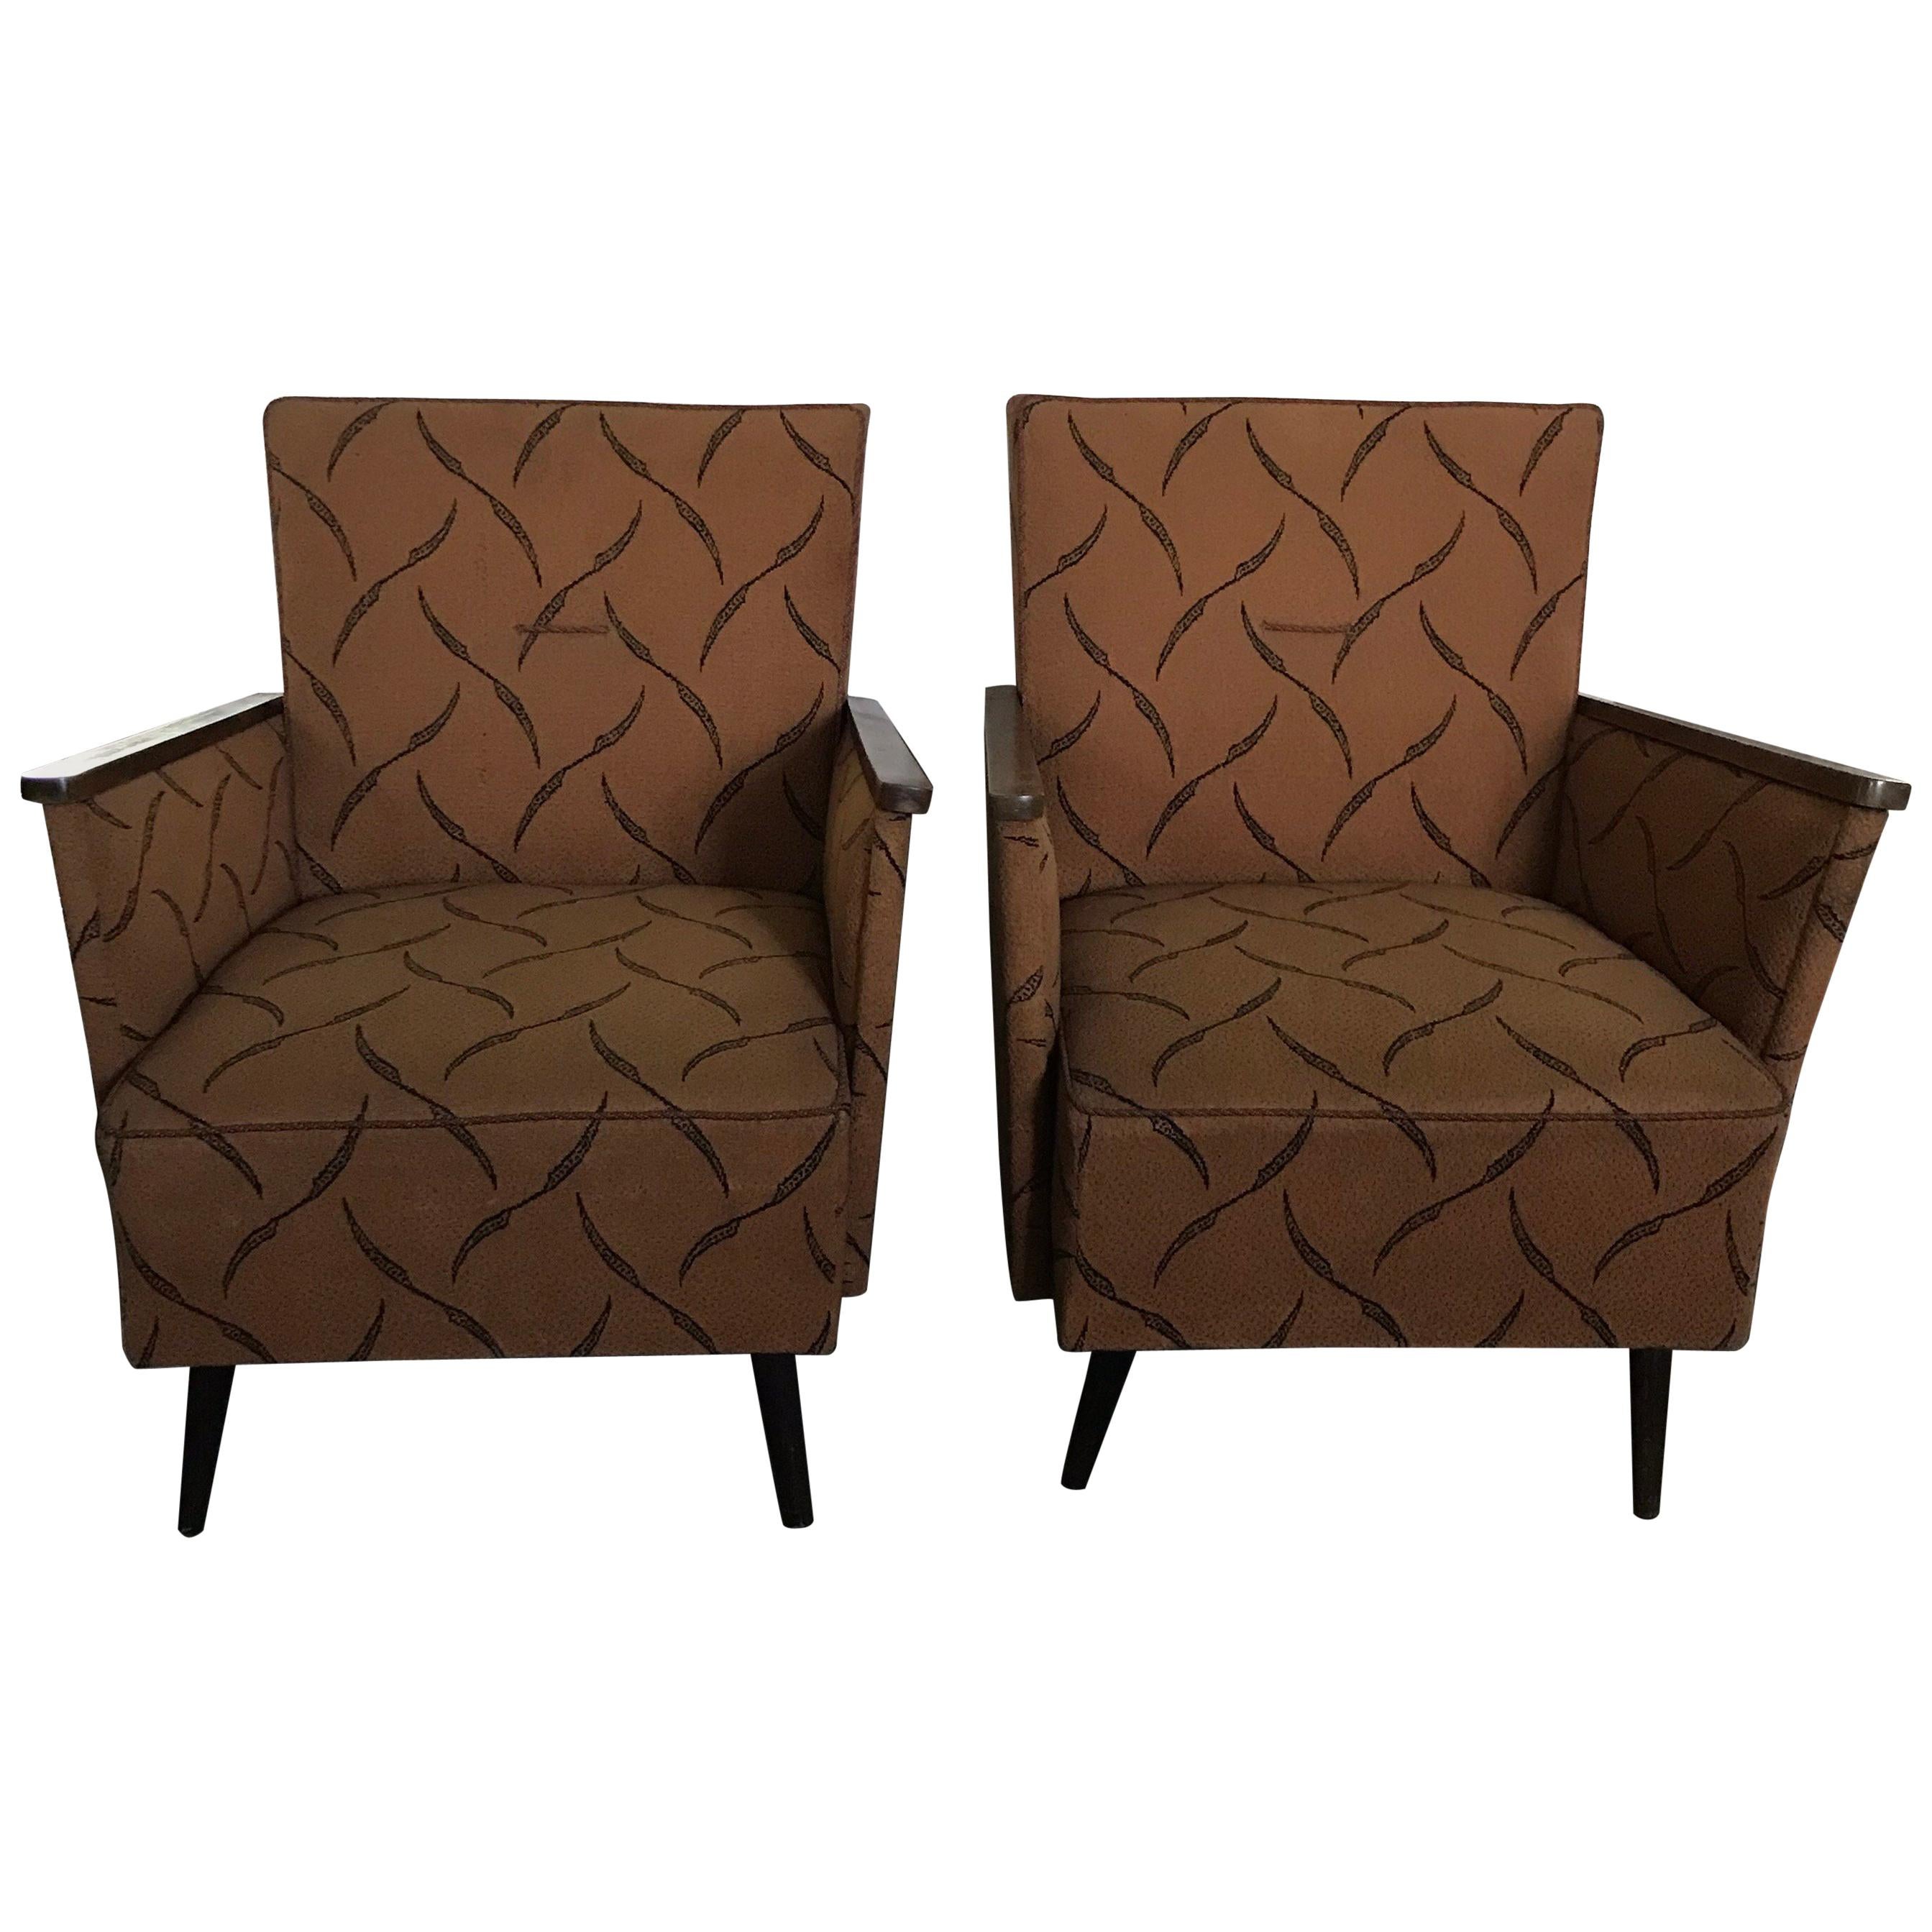 Pair of Midcentury Original Fabric and Walnut Wood Hungarian Armchairs, 1950 For Sale